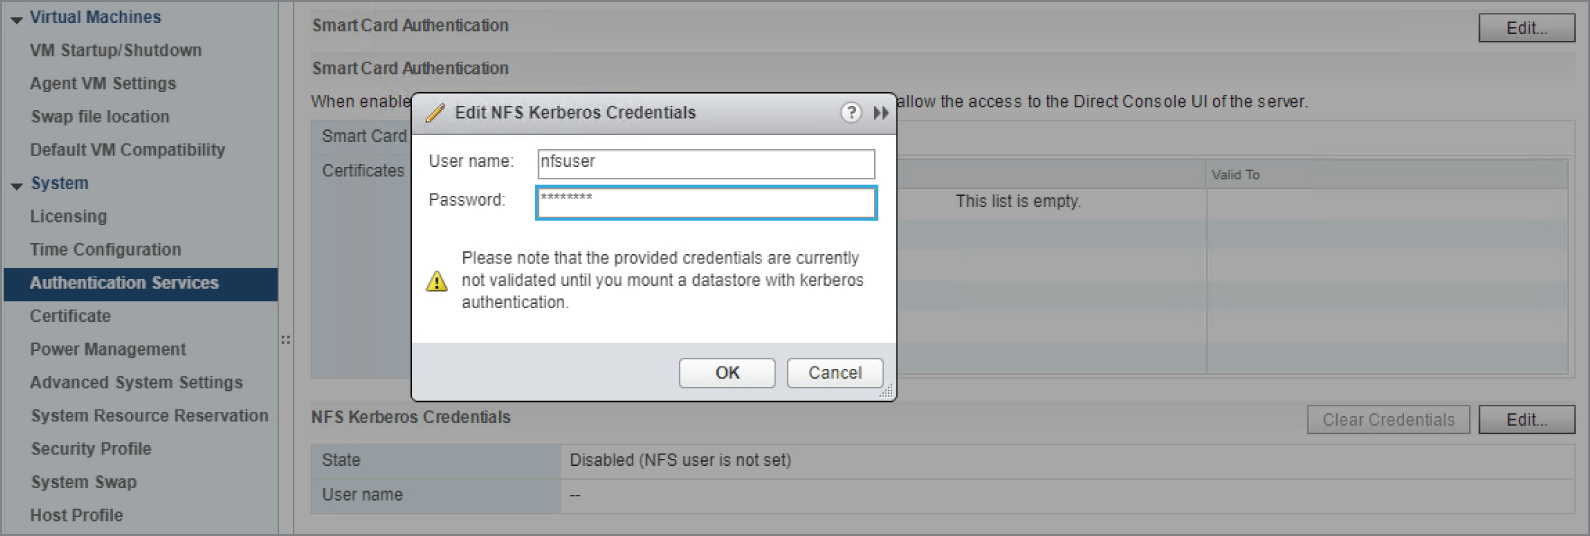 Snapshot of opening the Authentication Services menu on the host and set the Kerberos credentials.